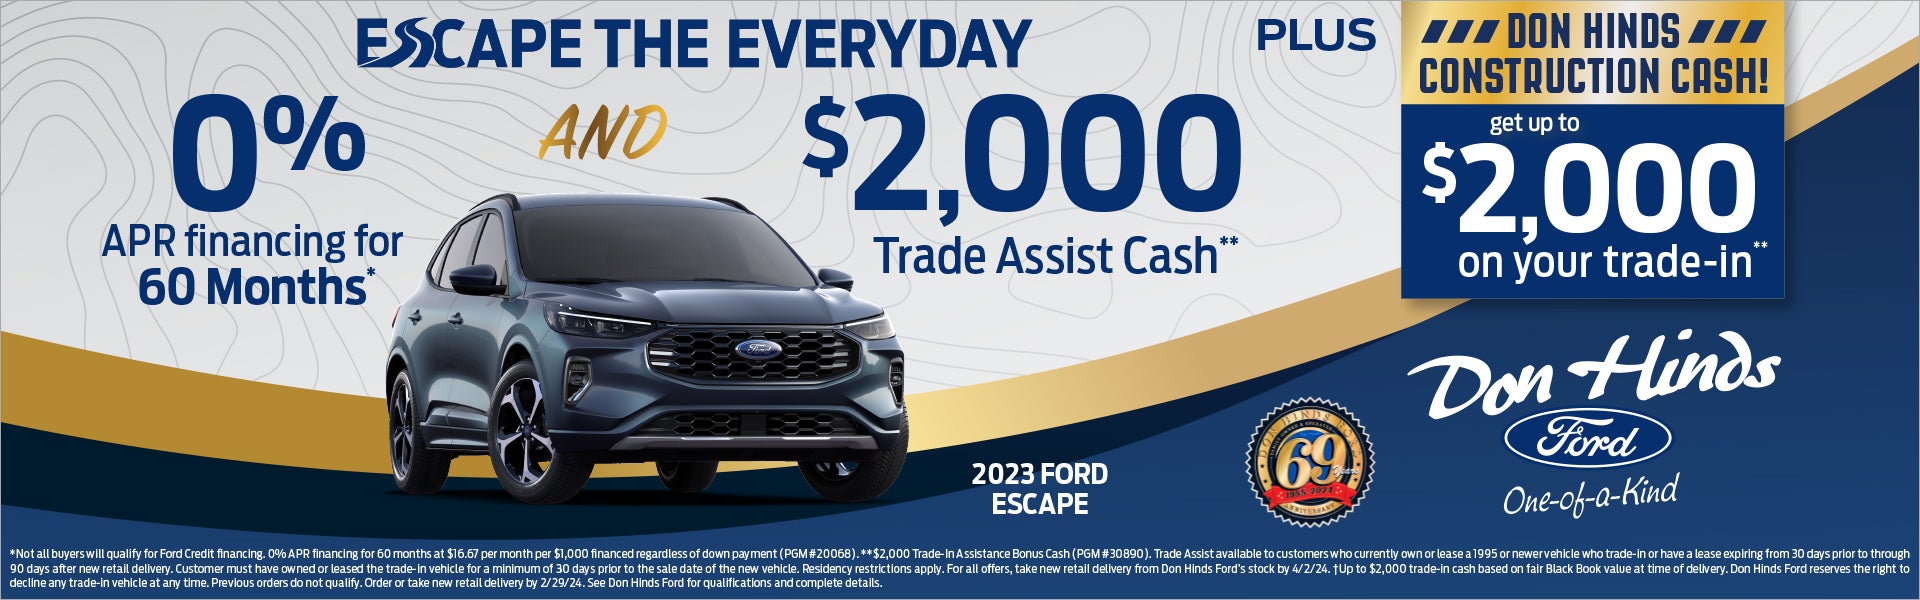 Don Hinds Ford blue & gold 2023 Escape banner ad